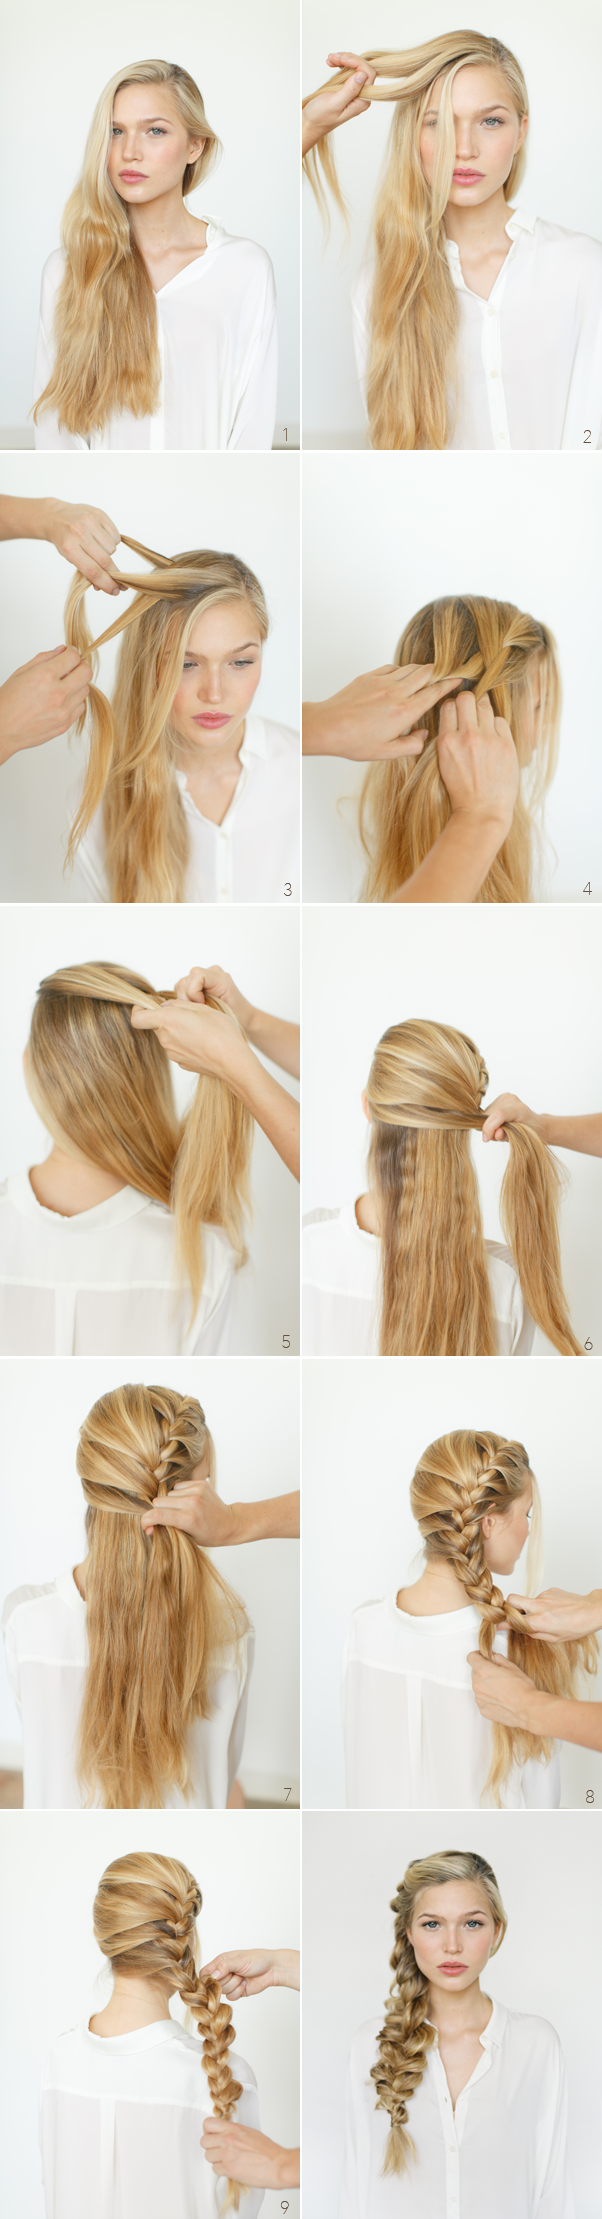 Romantic tutorial for loose side braids